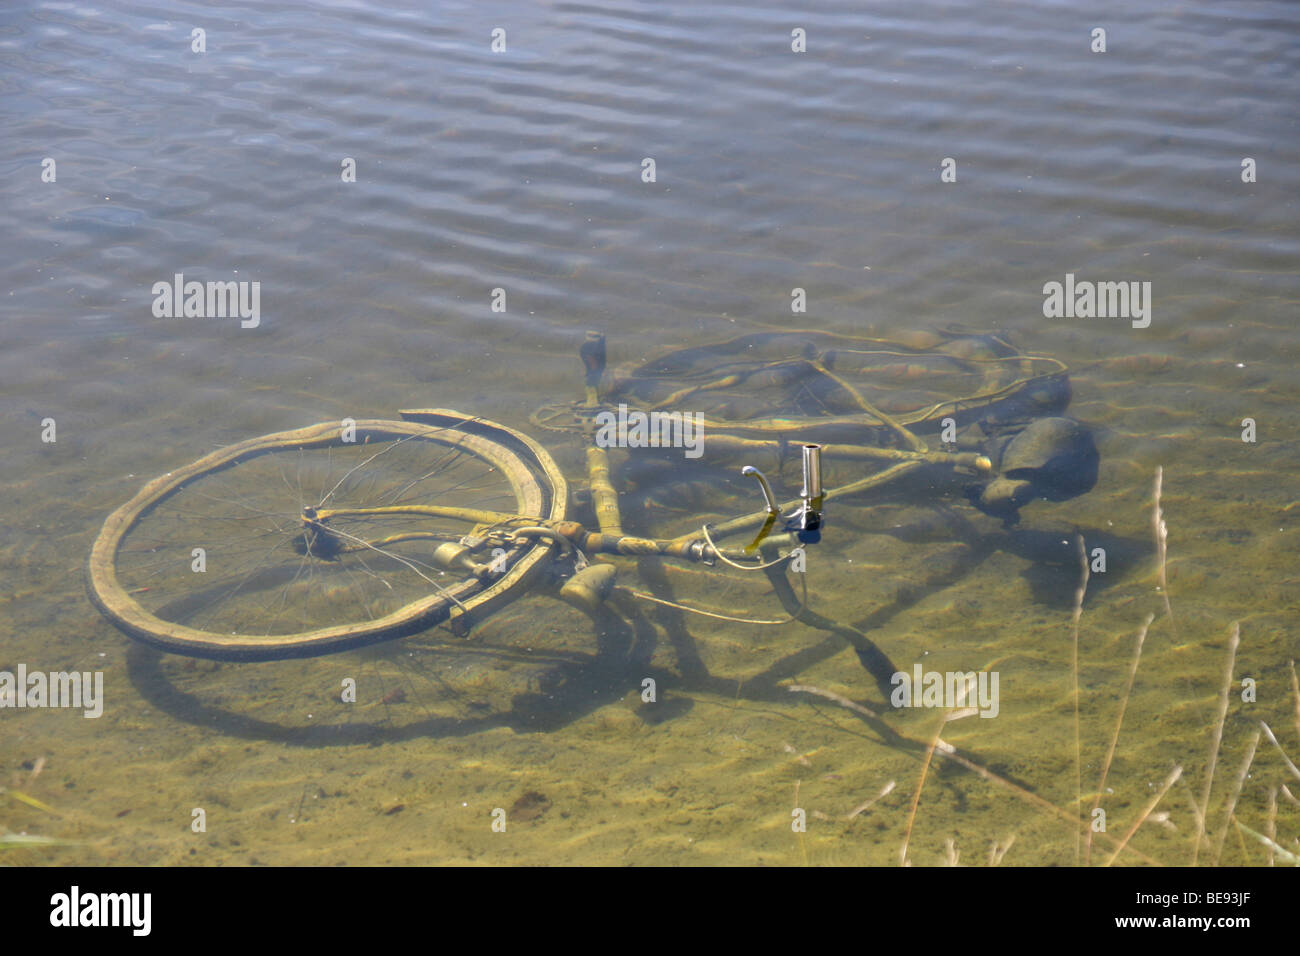 Bicycle lying in a lake Stock Photo